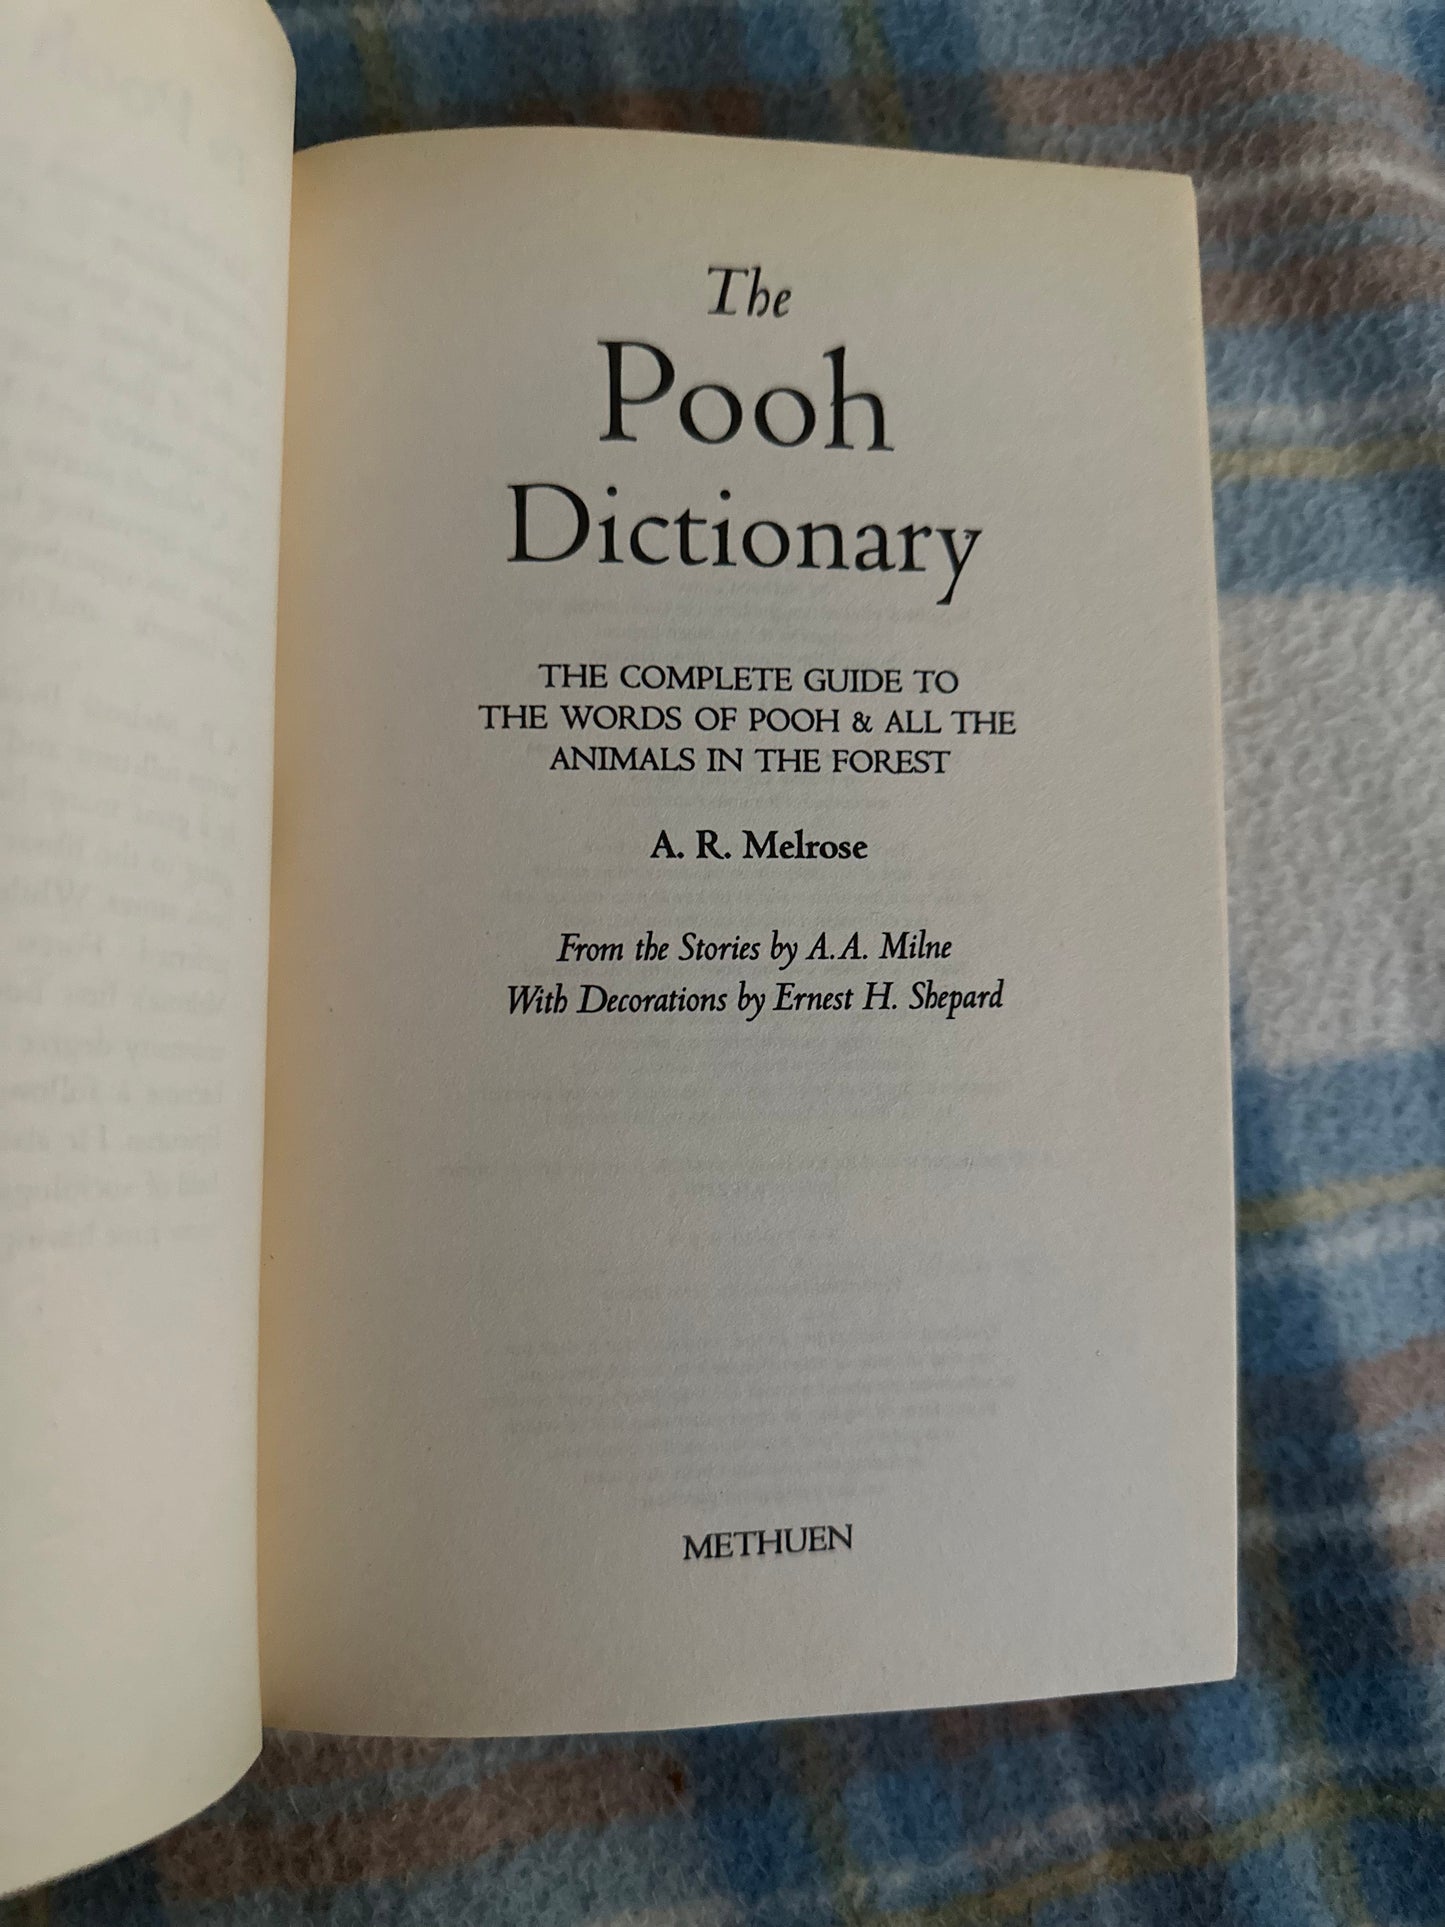 1997 The Pooh Dictionary - A.R. Melrose(Methuen) decorations Ernest Shepard